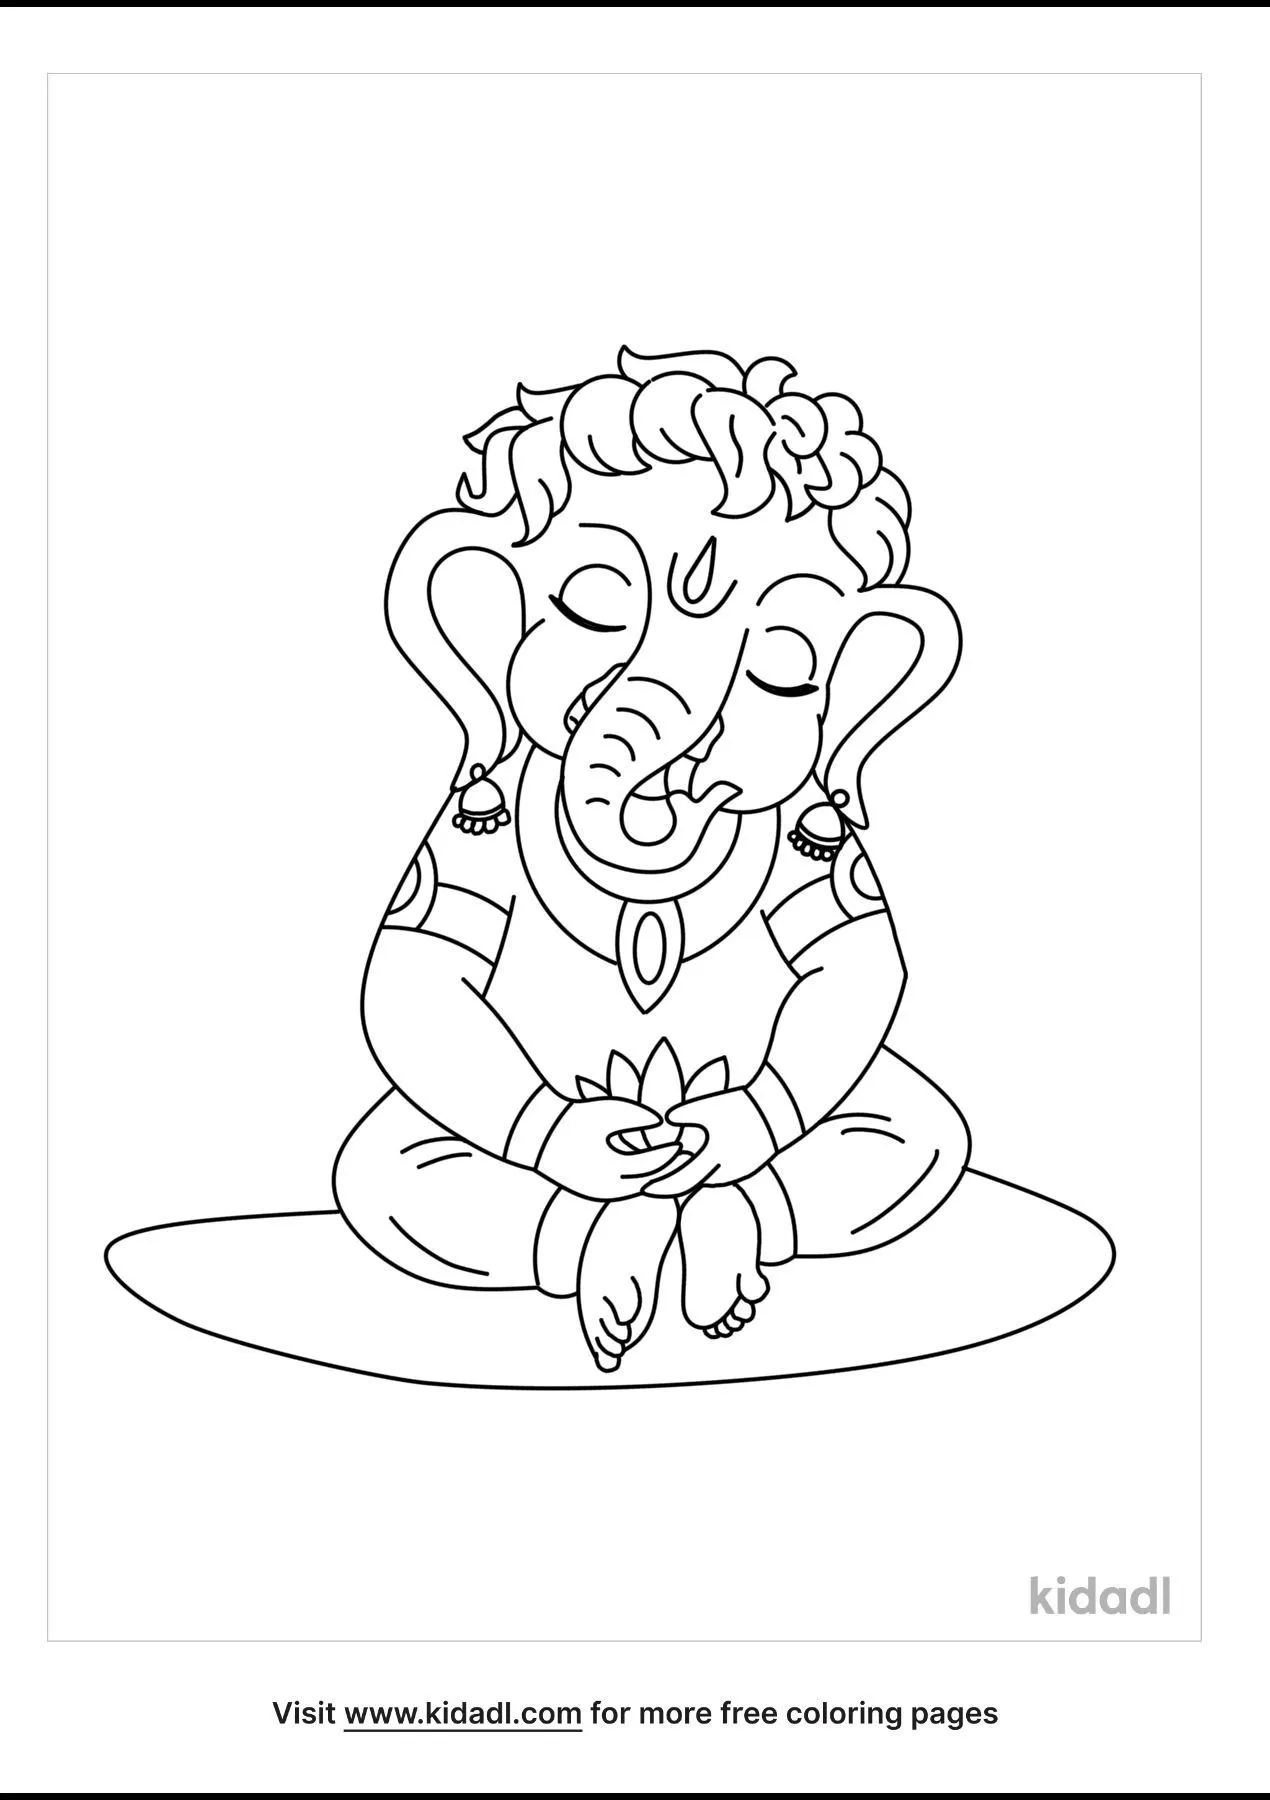 ganesh coloring pages for kids